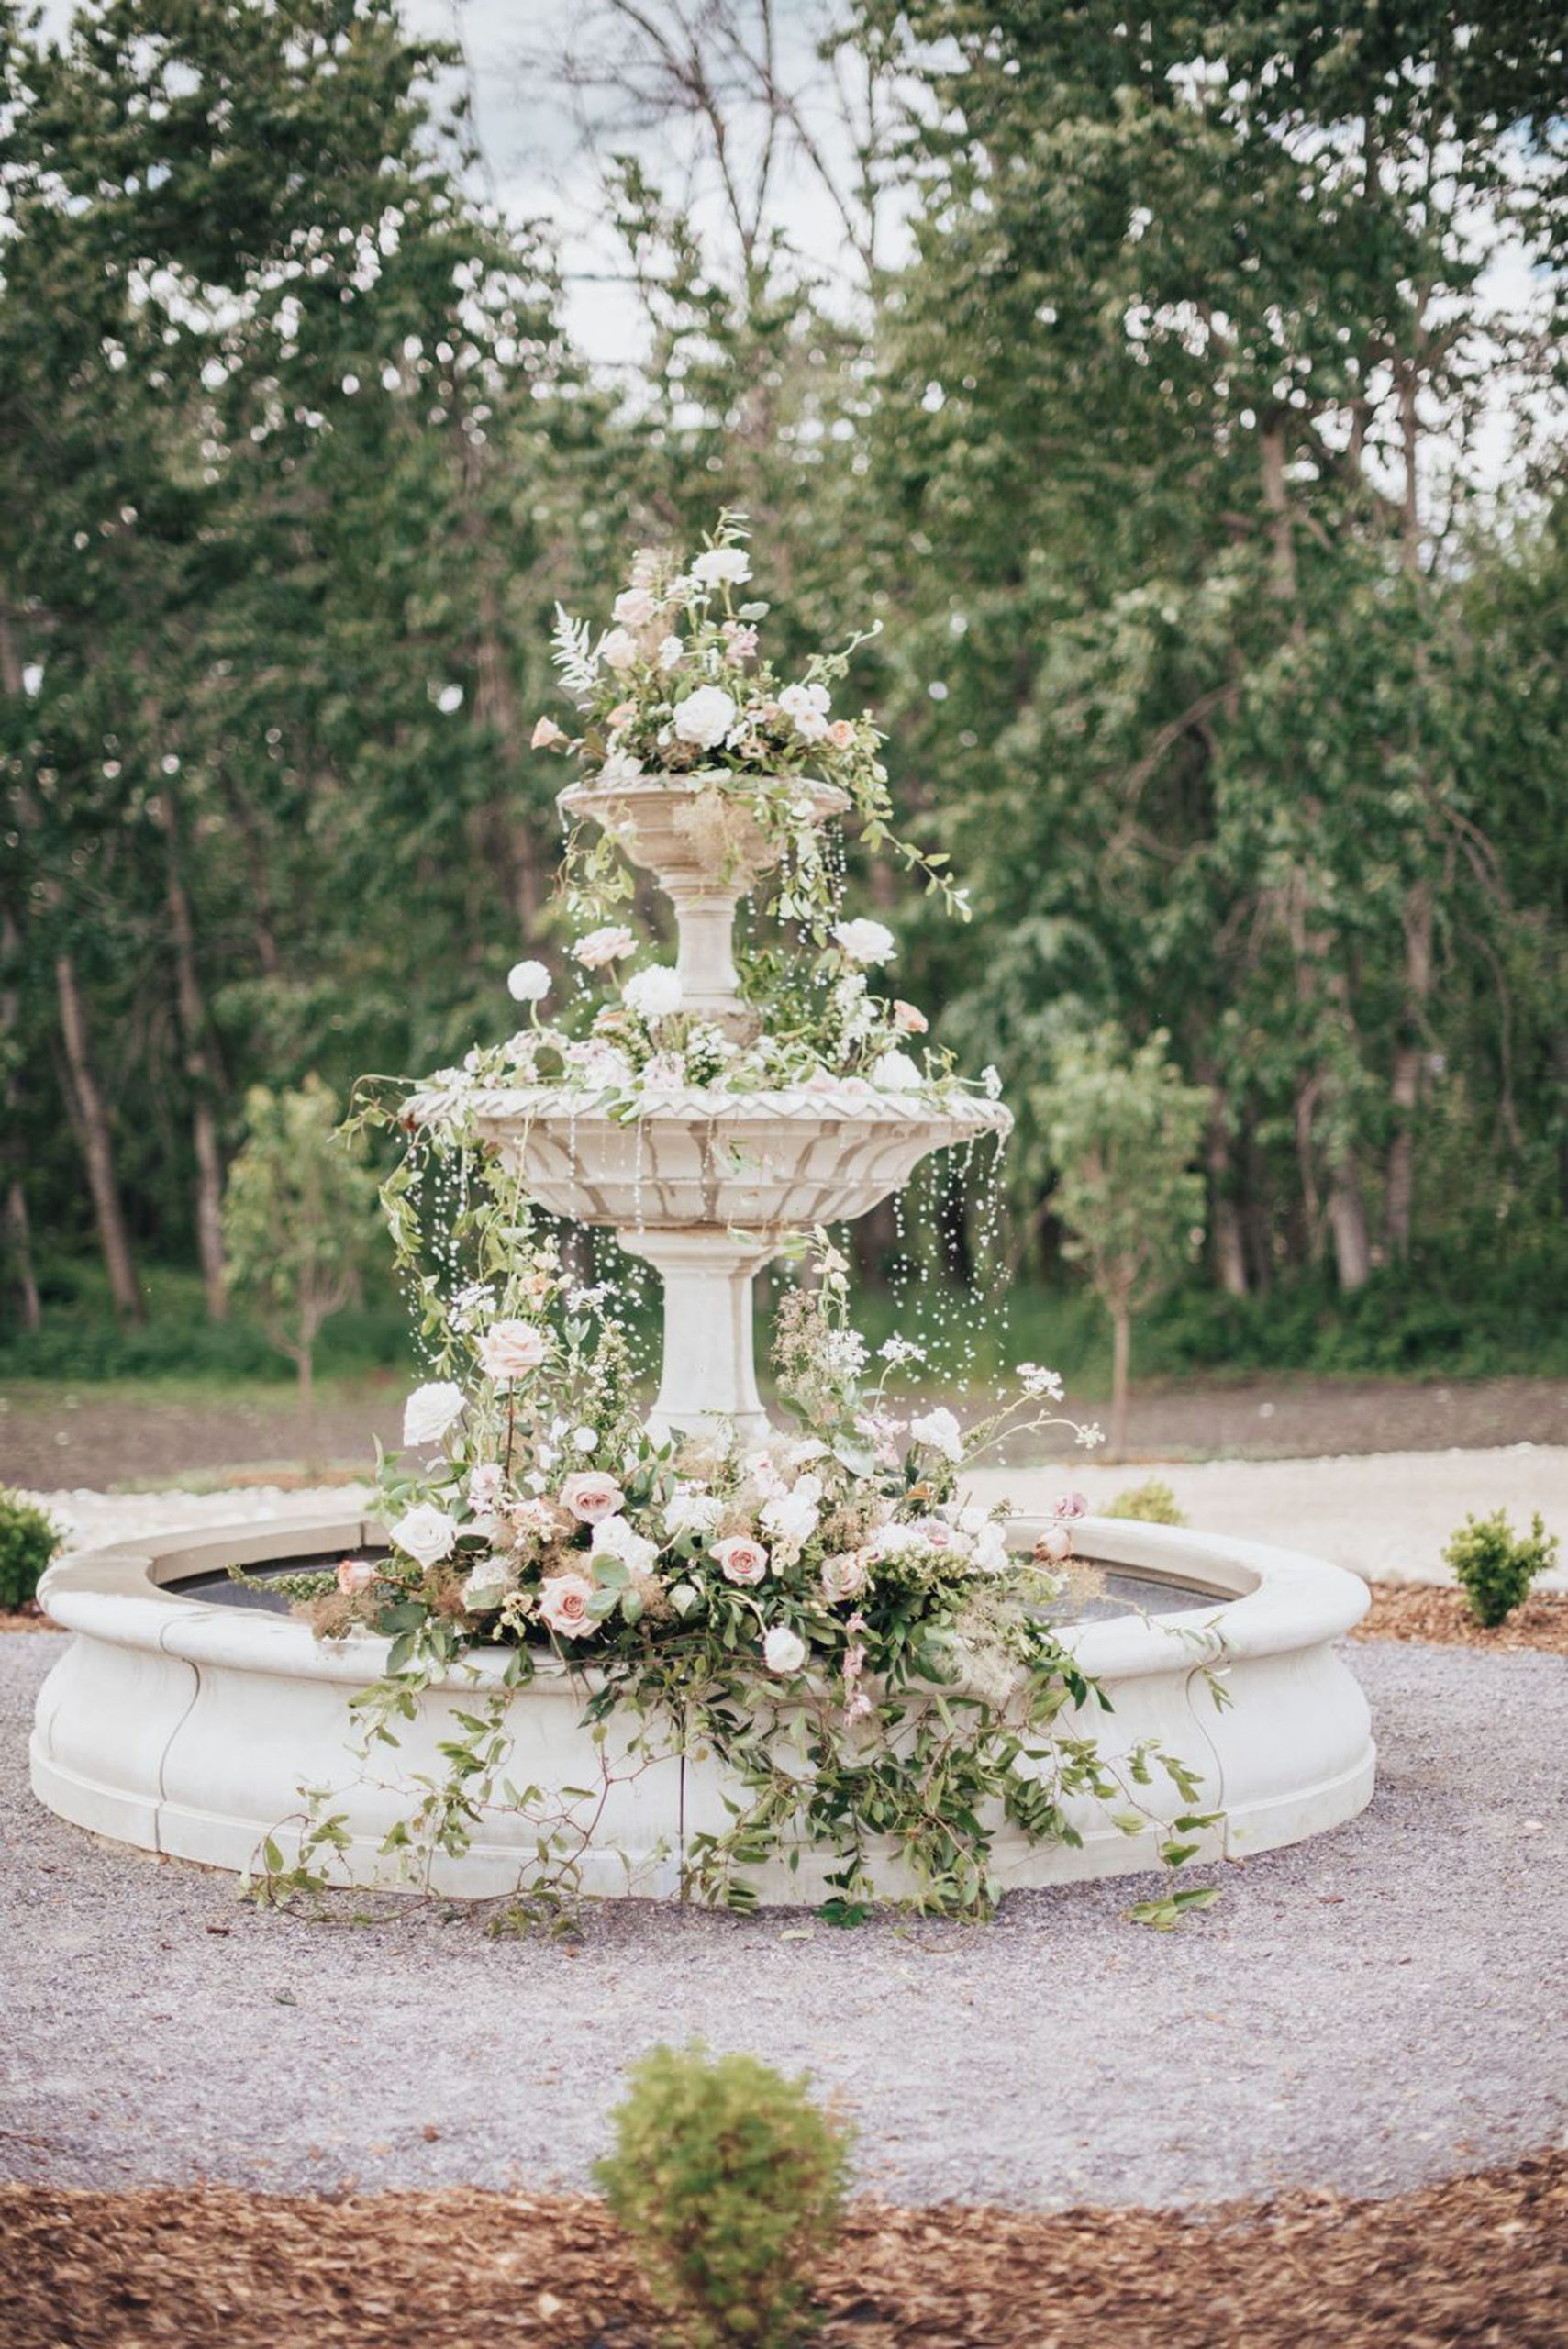 Large outdoor fountain draped in wedding florals and greenery